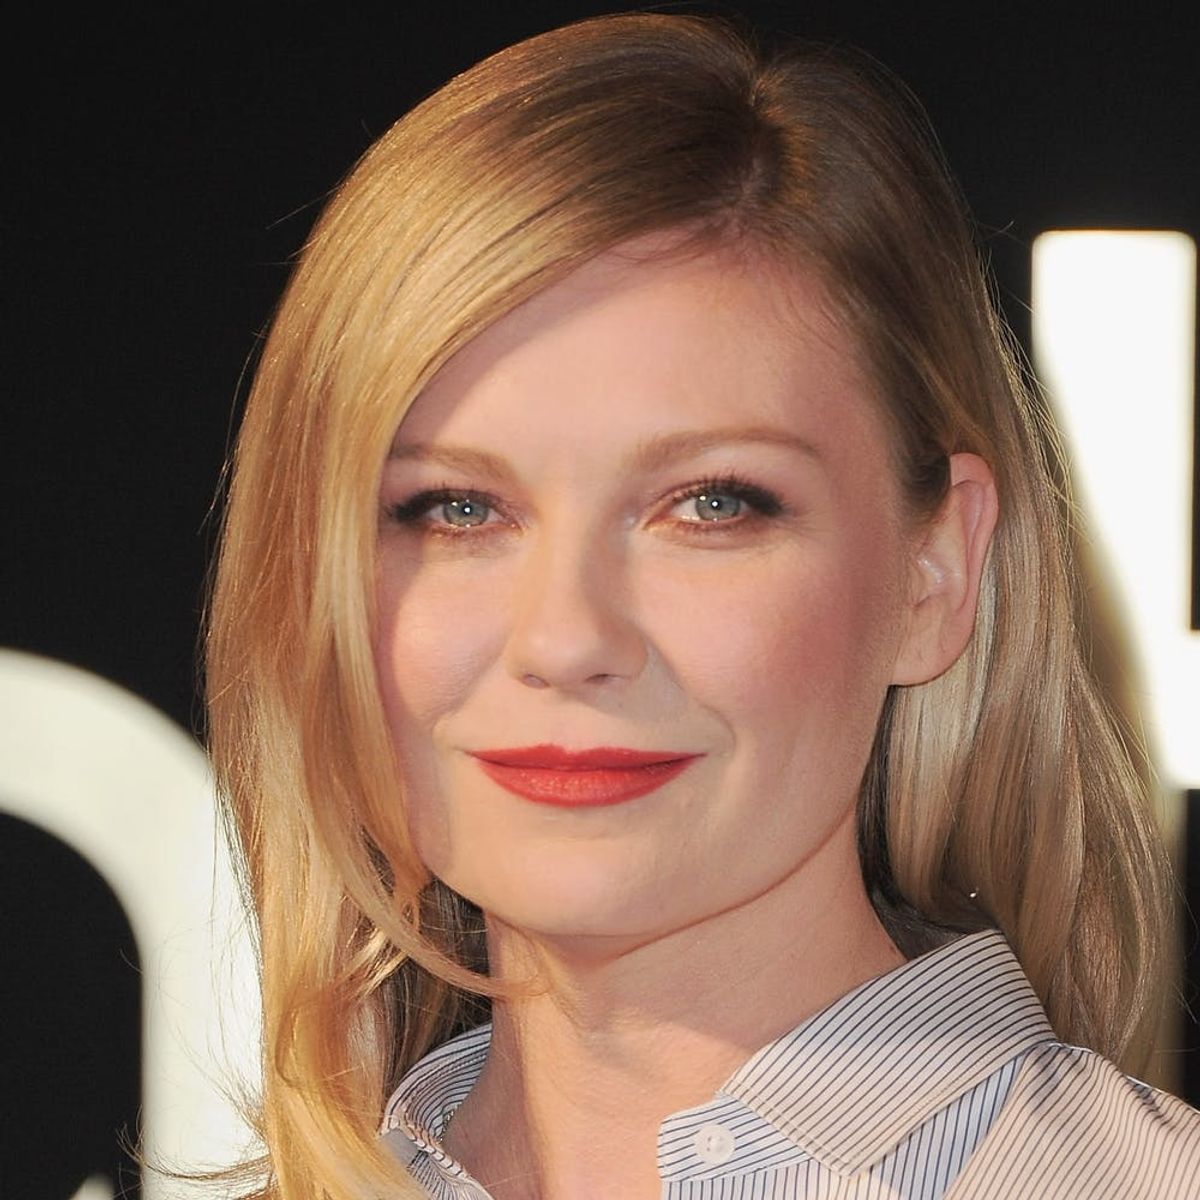 Kirsten Dunst Is the Latest Actress to Refuse to Lose Weight for a Role